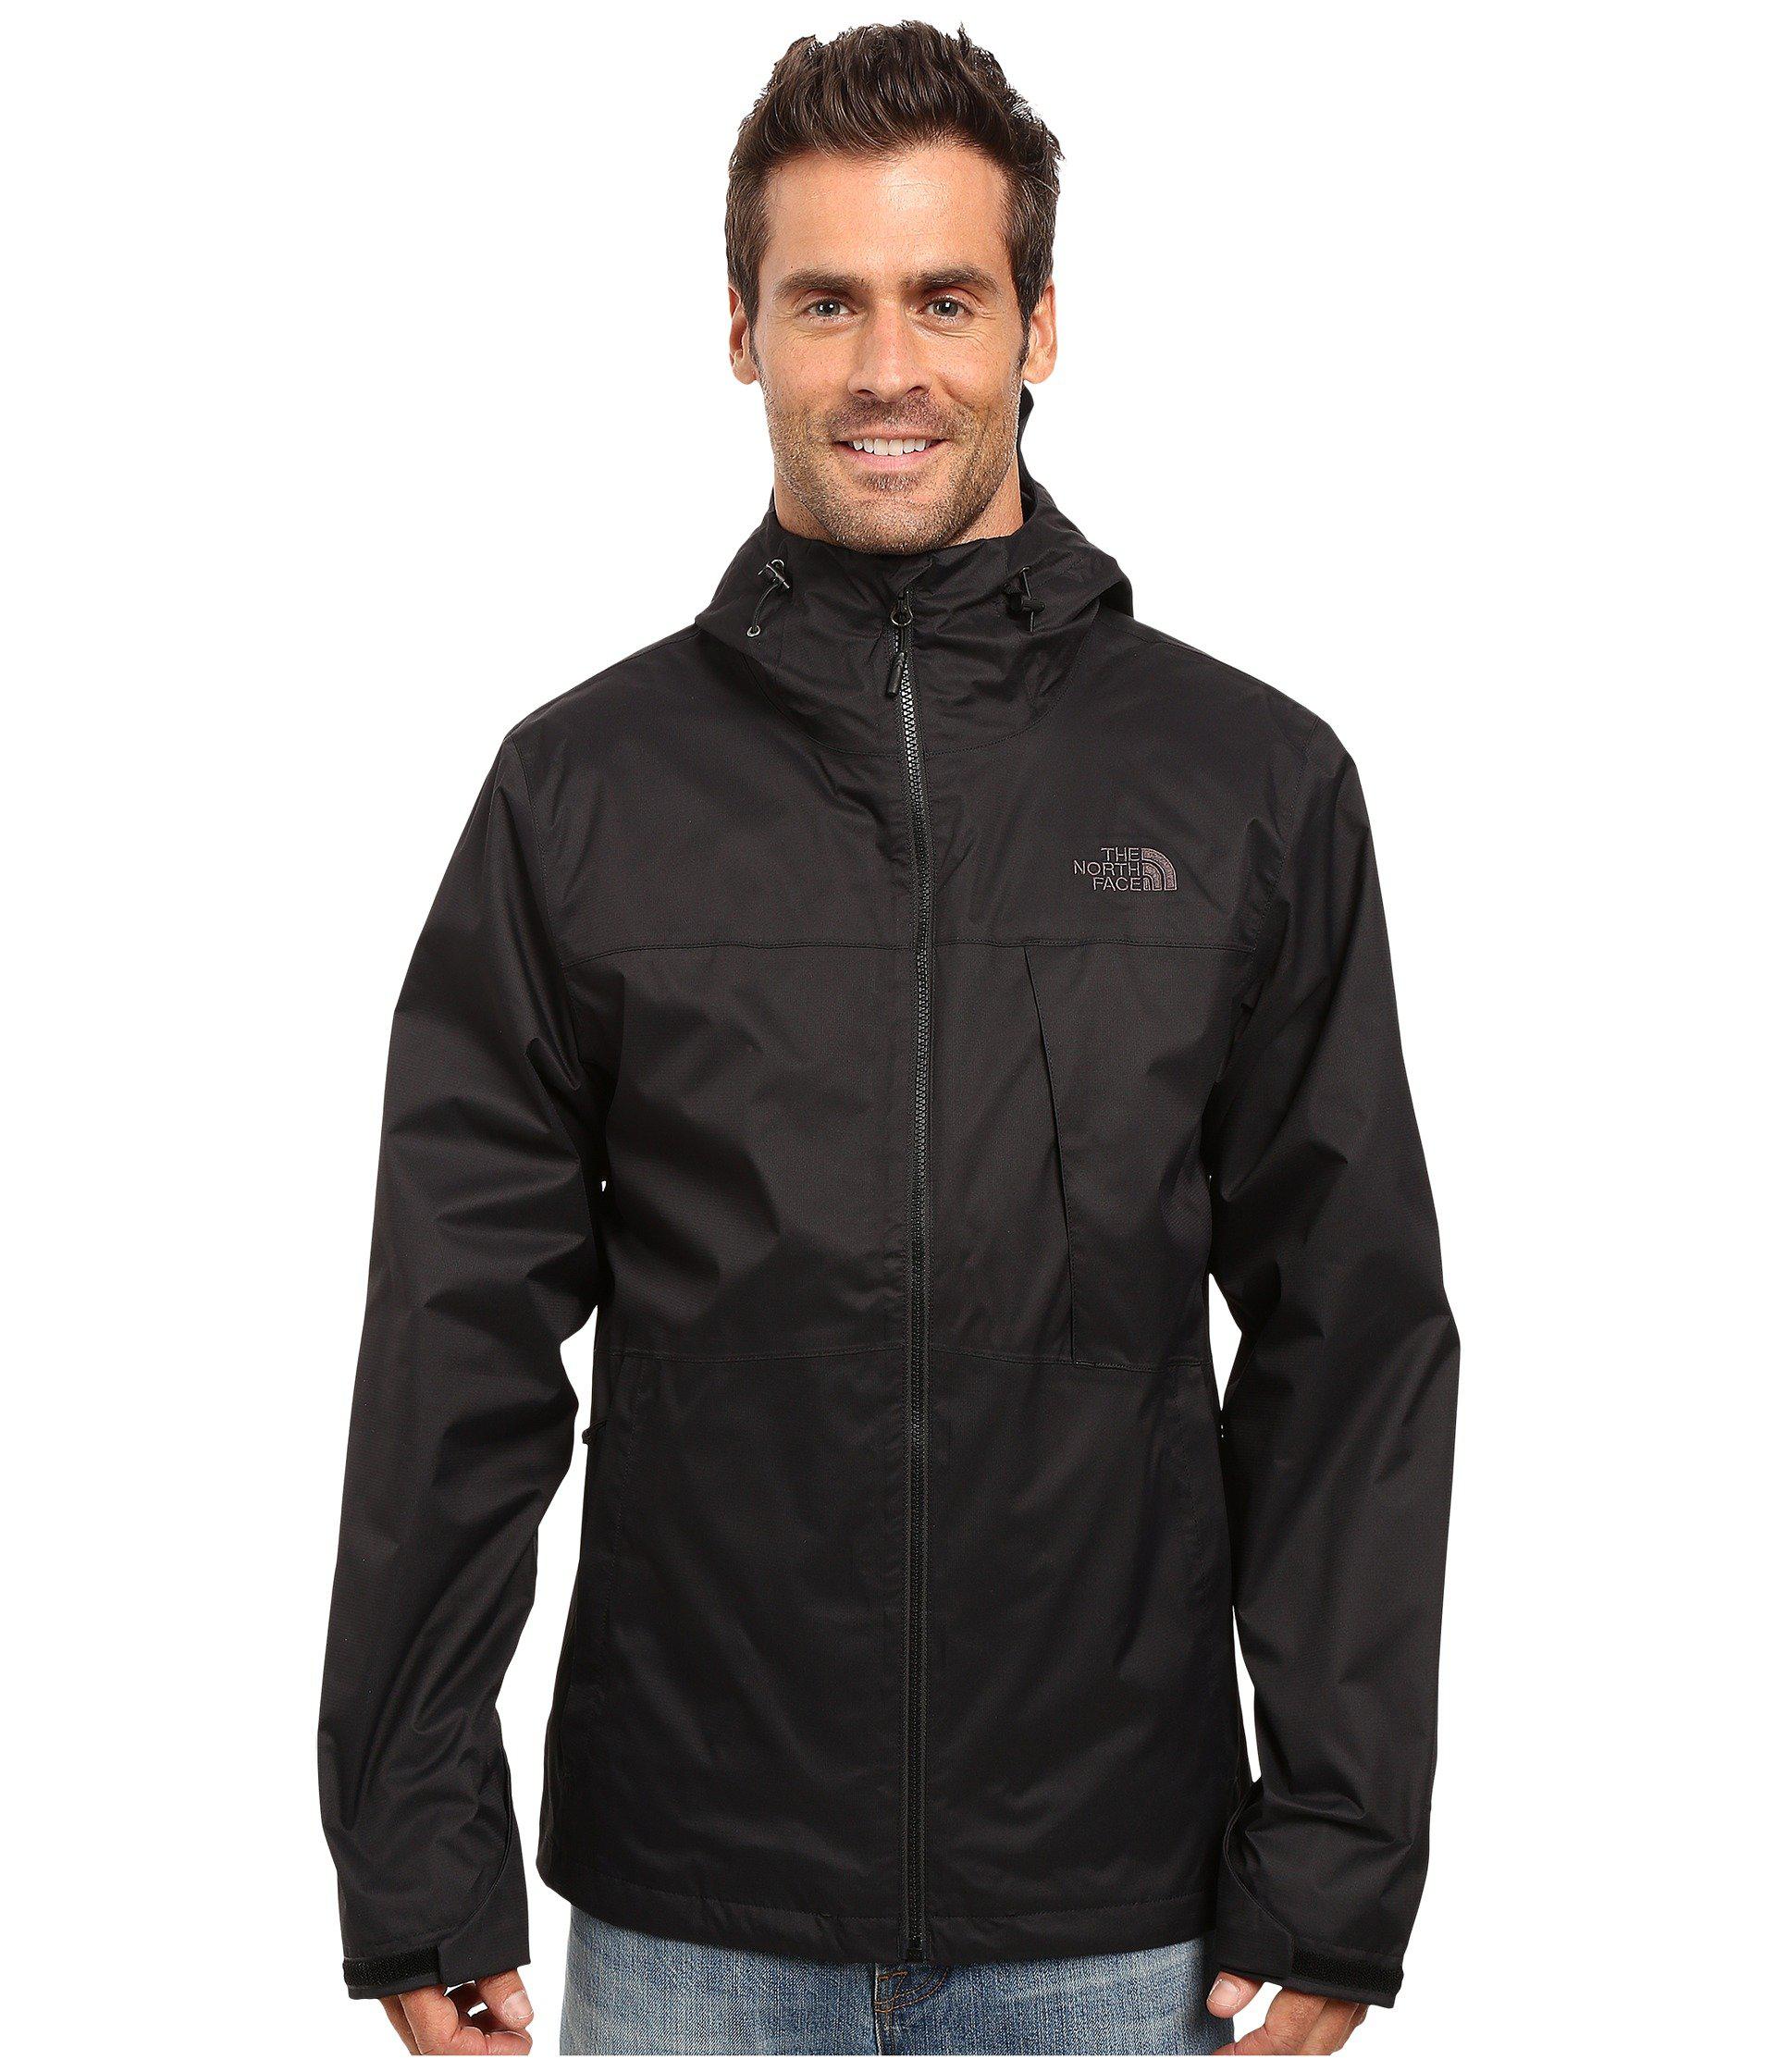 the north face arrowood triclimate jacket men's